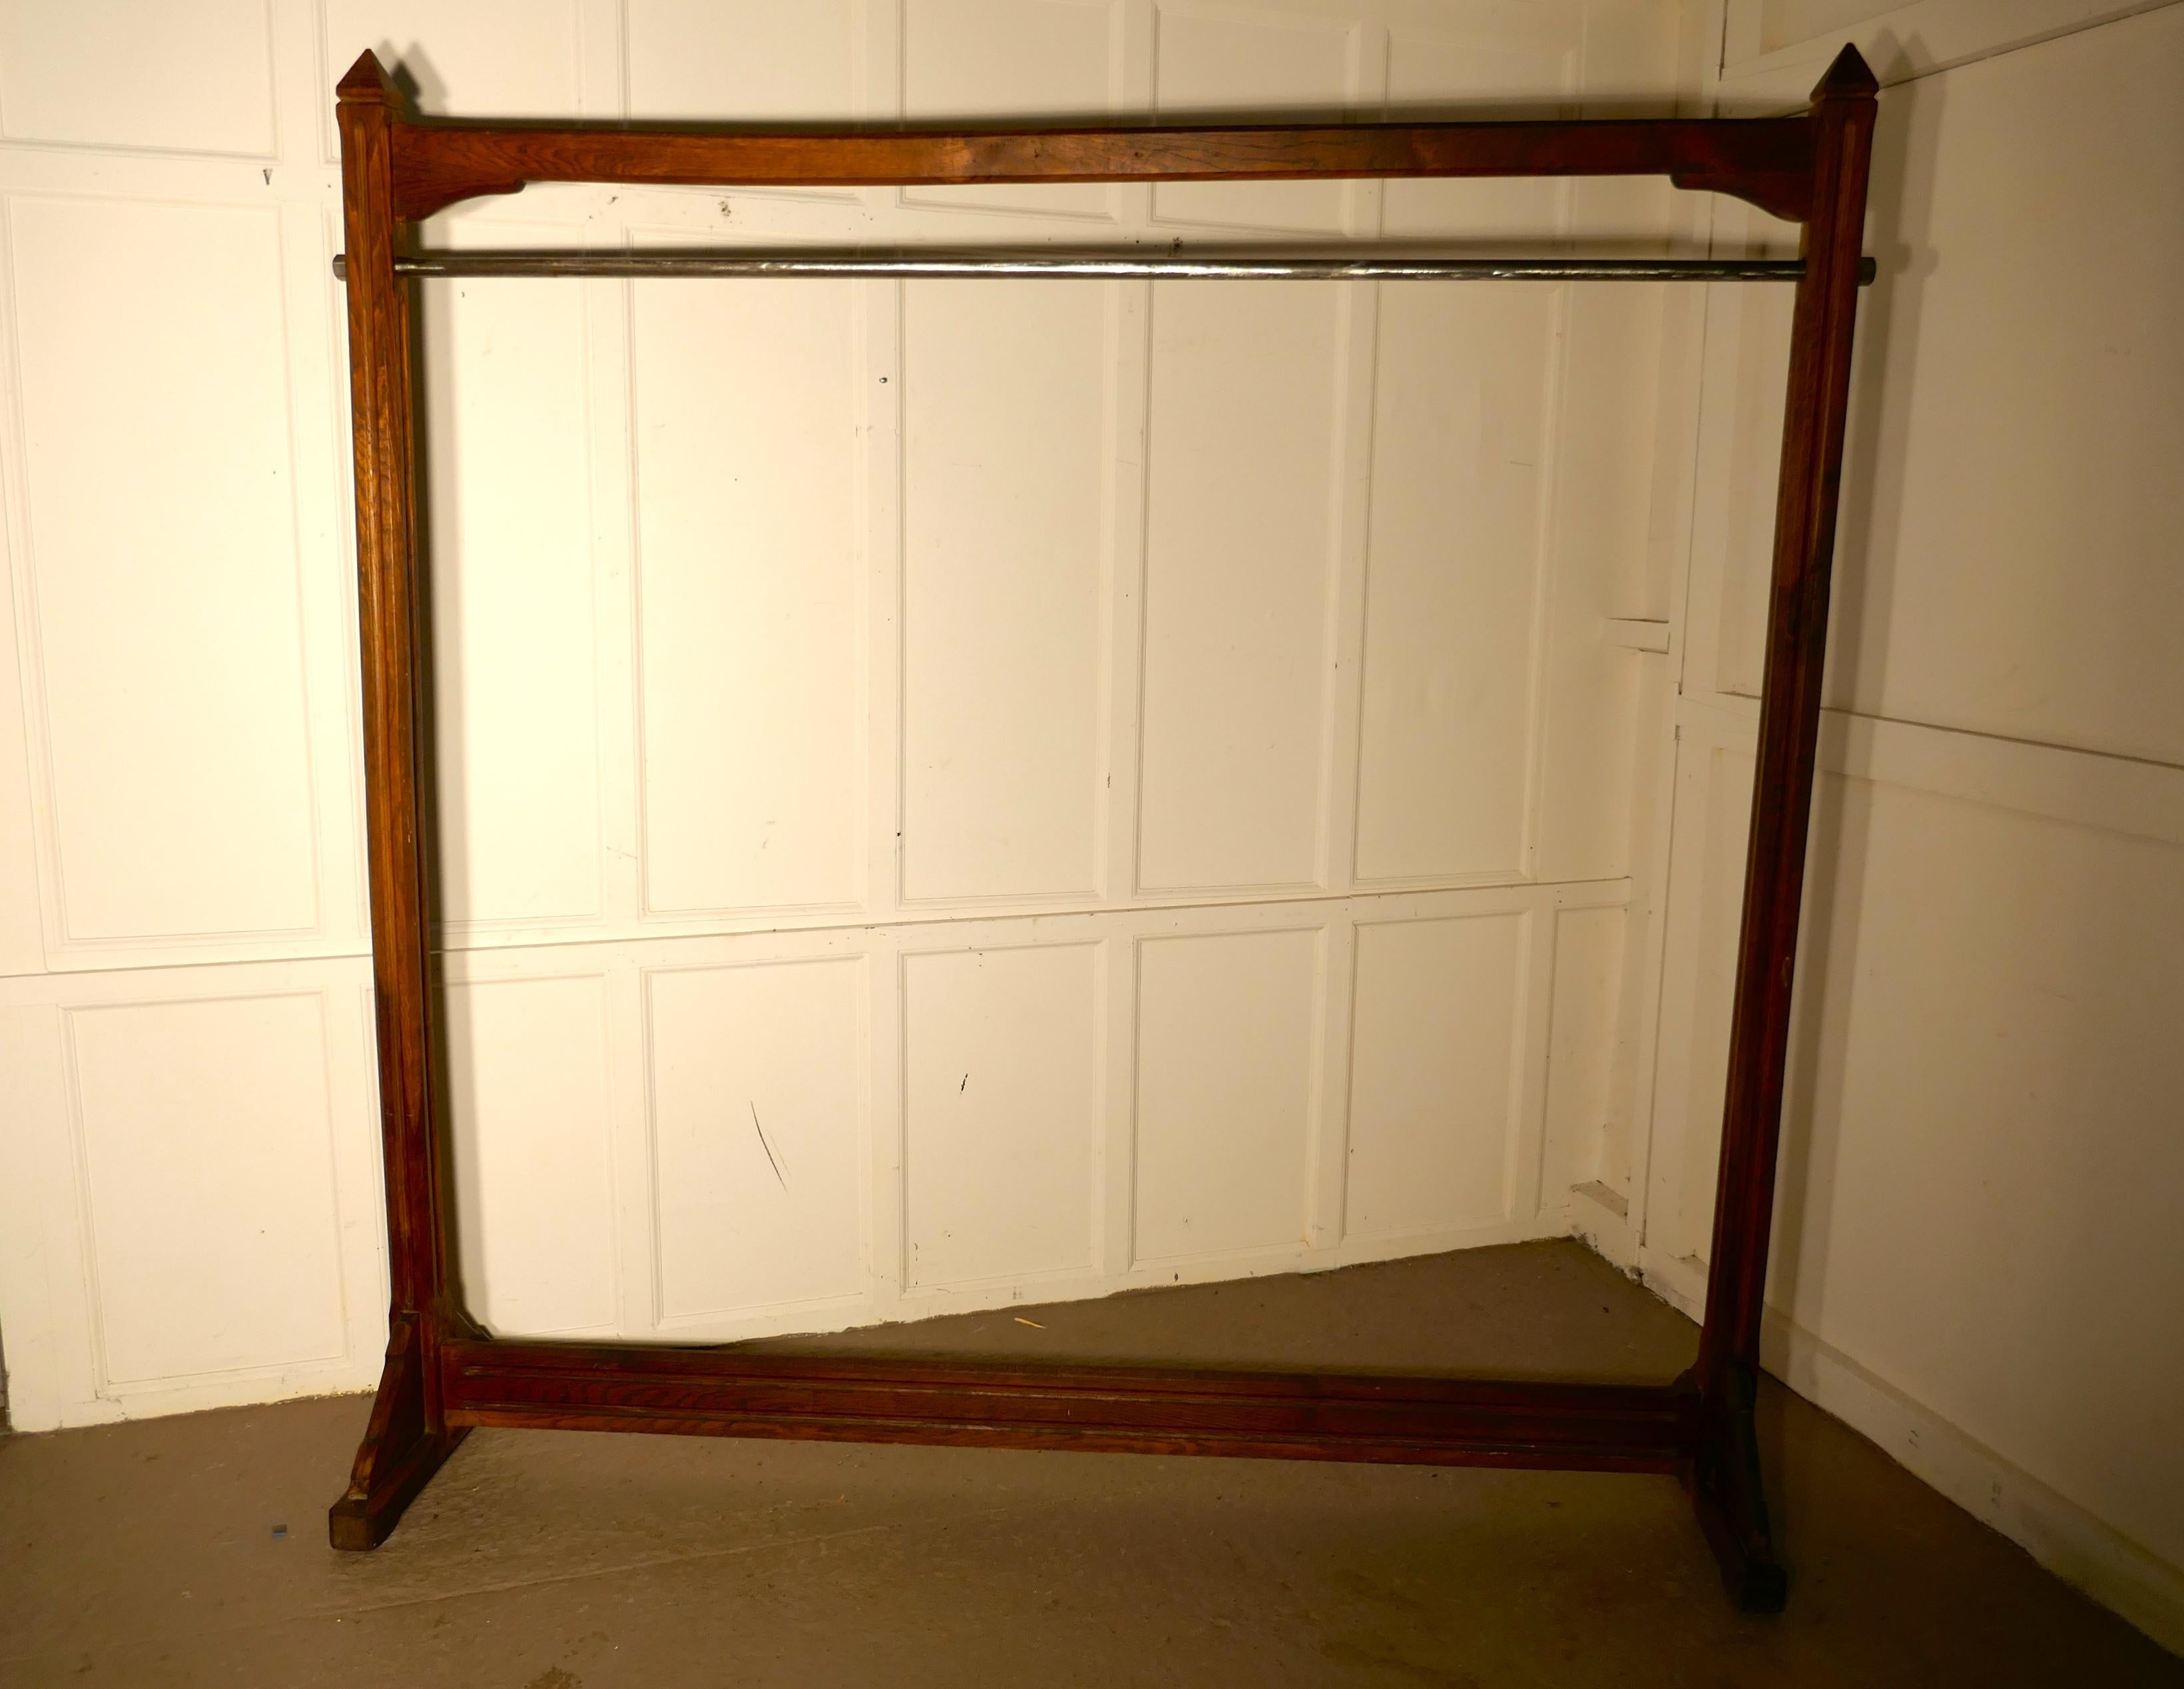 A large French Art & Crafts golden oak clothes rail 

The clothes rail came from a Paris couturier, the frame is made in Golden oak and the rail is made in steel 
The wood is reeded in the Arts & Crafts style, it is stylishly topped off with